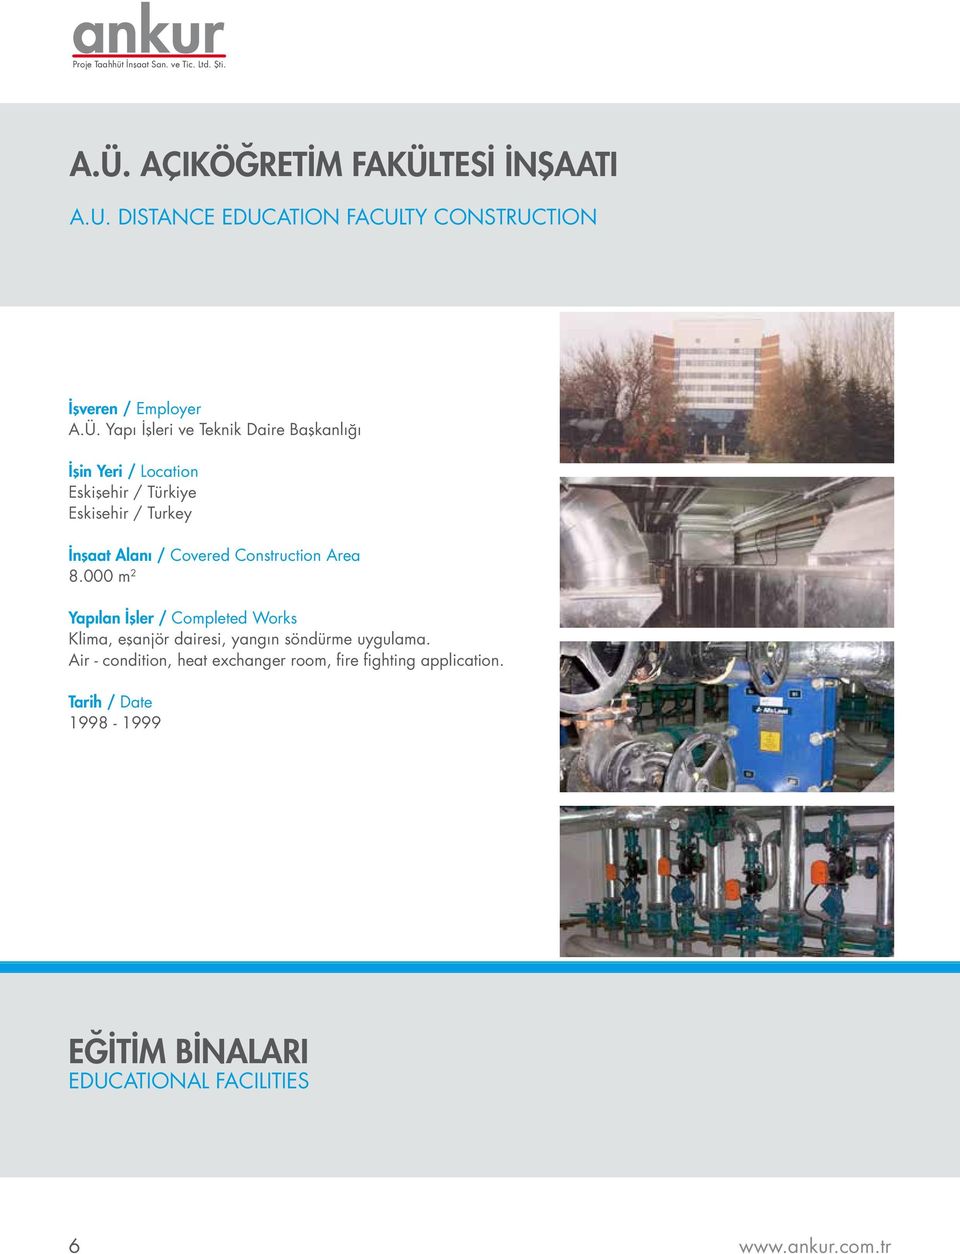 Air - condition, heat exchanger room, fire fighting application.